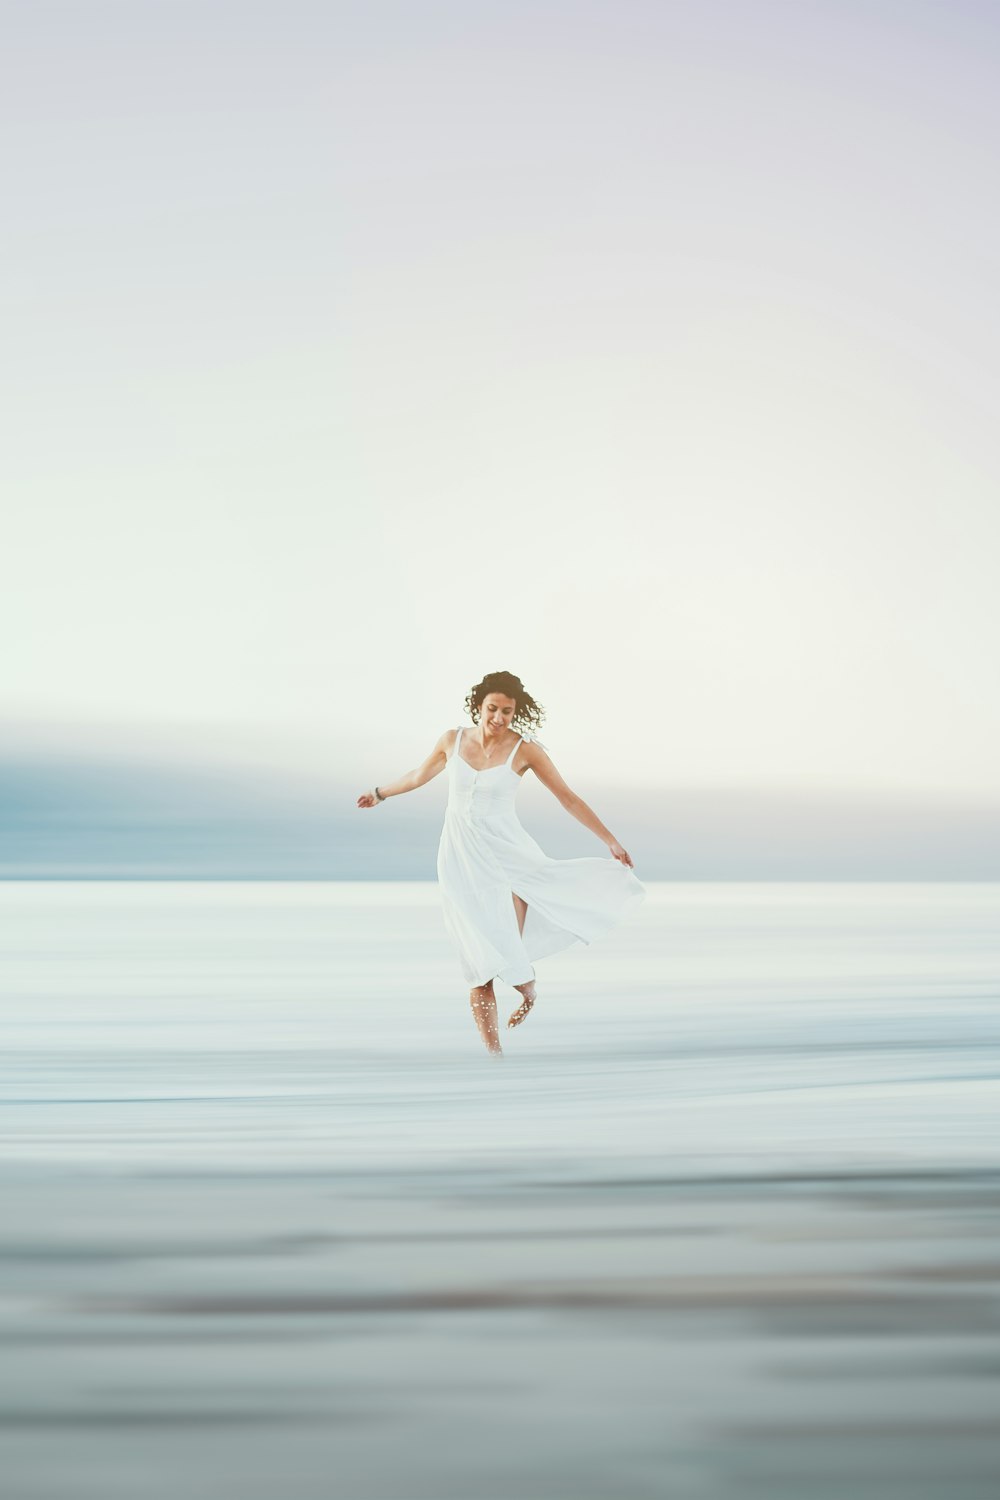 a woman in a white dress jumping in the air